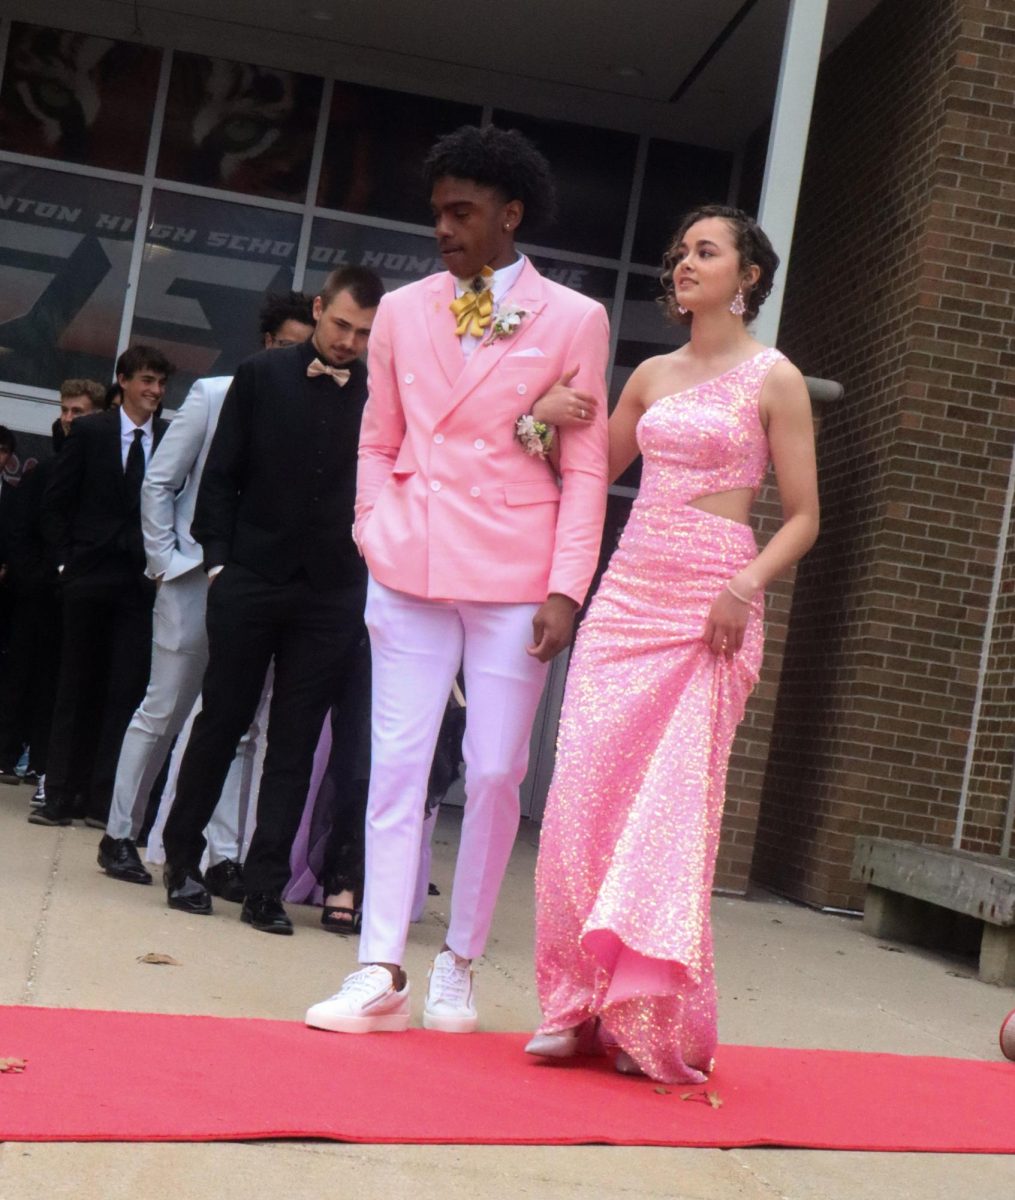 Waiting, Laila Blackwell and JaHion Bond walk the red carpet. On April 20, upperclassmen showed off their Prom attire before attending the formal. 